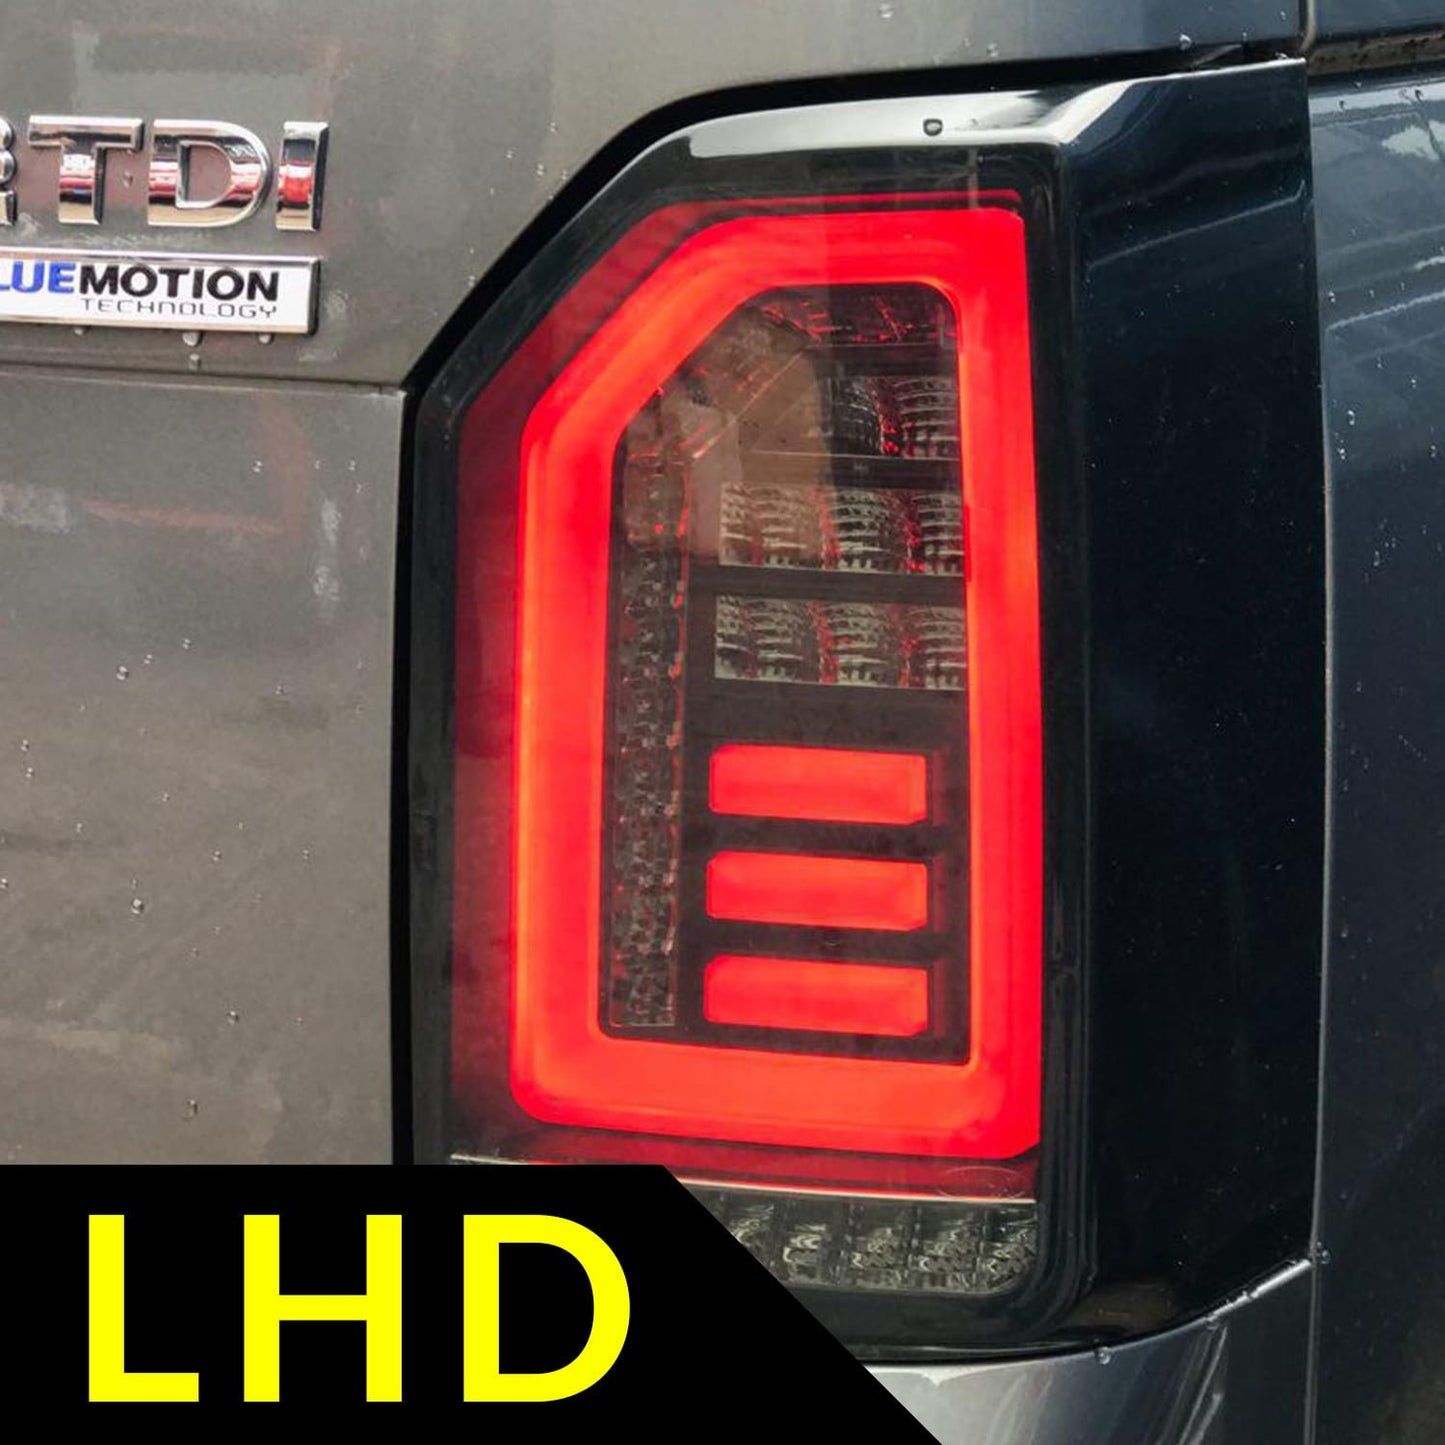 VW T6 Smoked Tailgate LHD Red-Bars European Left Hand Drive Van only Sequential Indicator